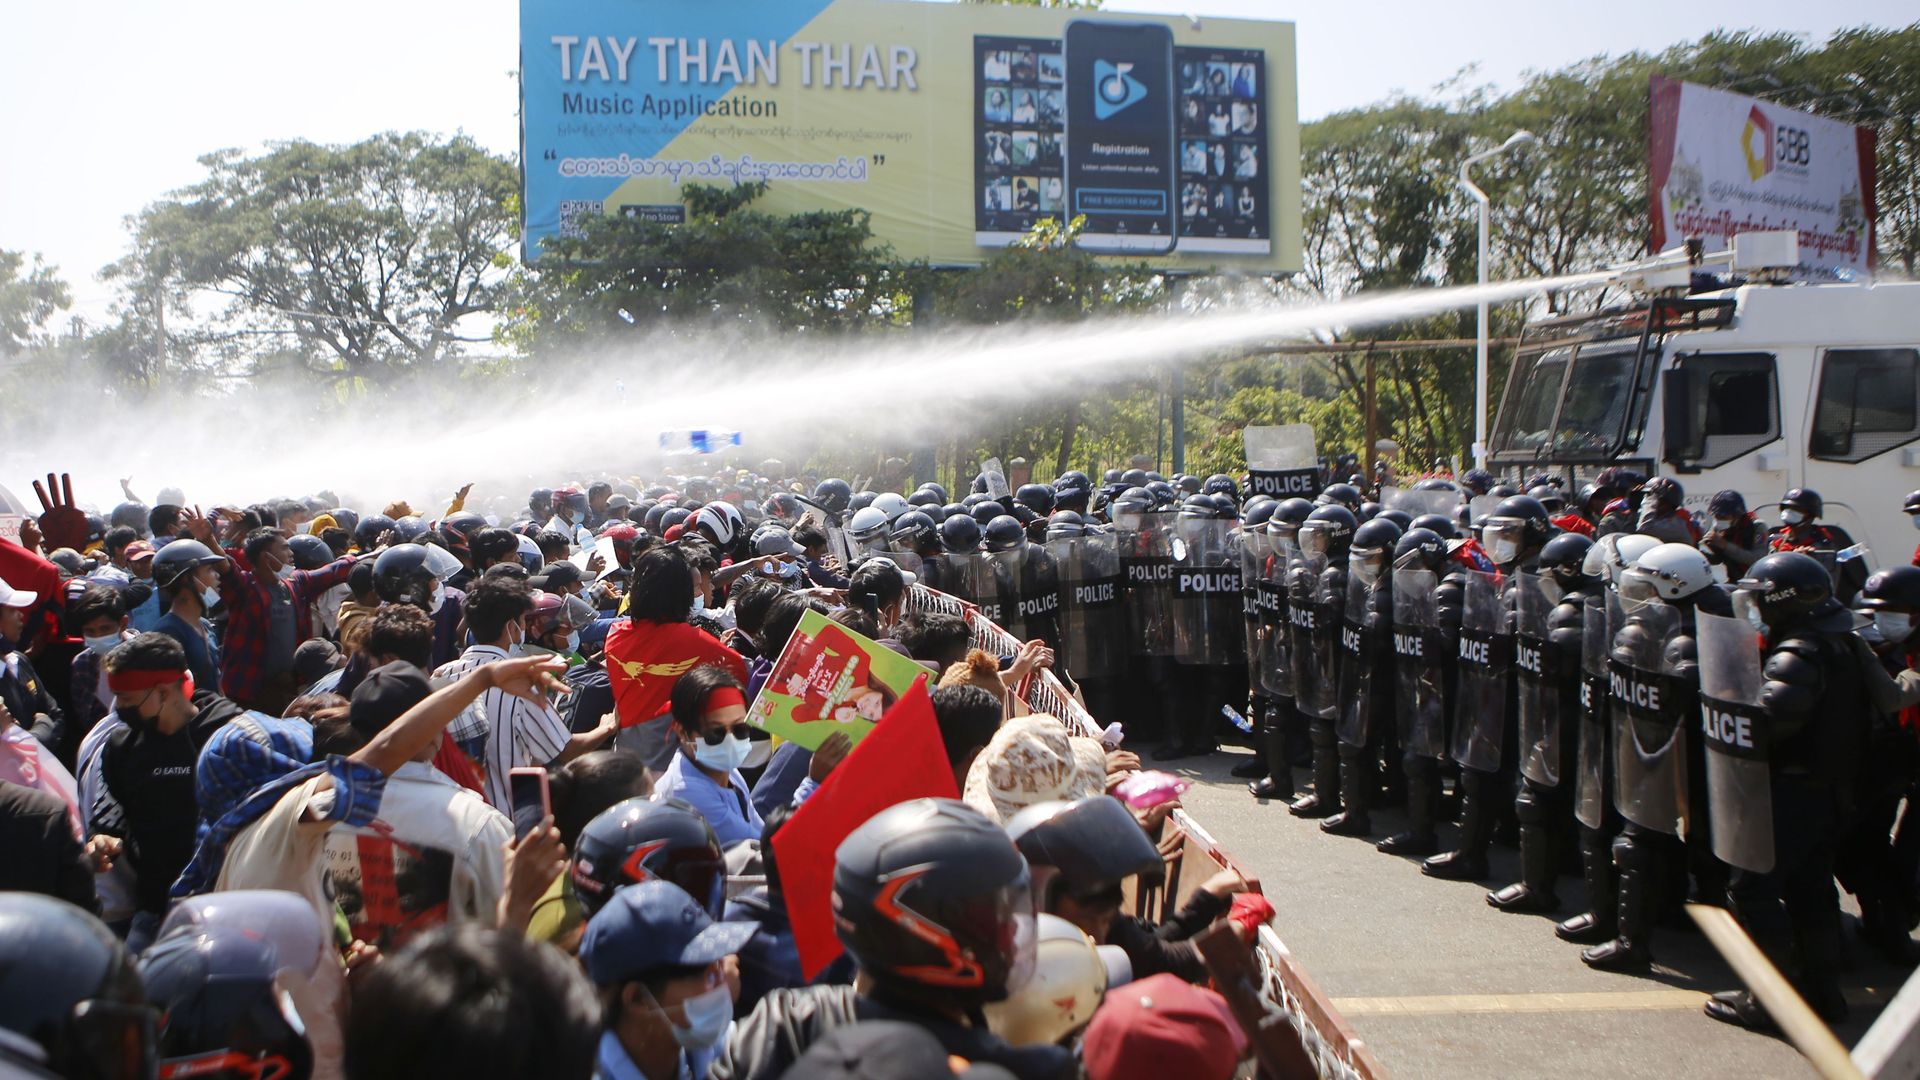 Photo of police using water cannons against a crowd of protesters in Myanmar